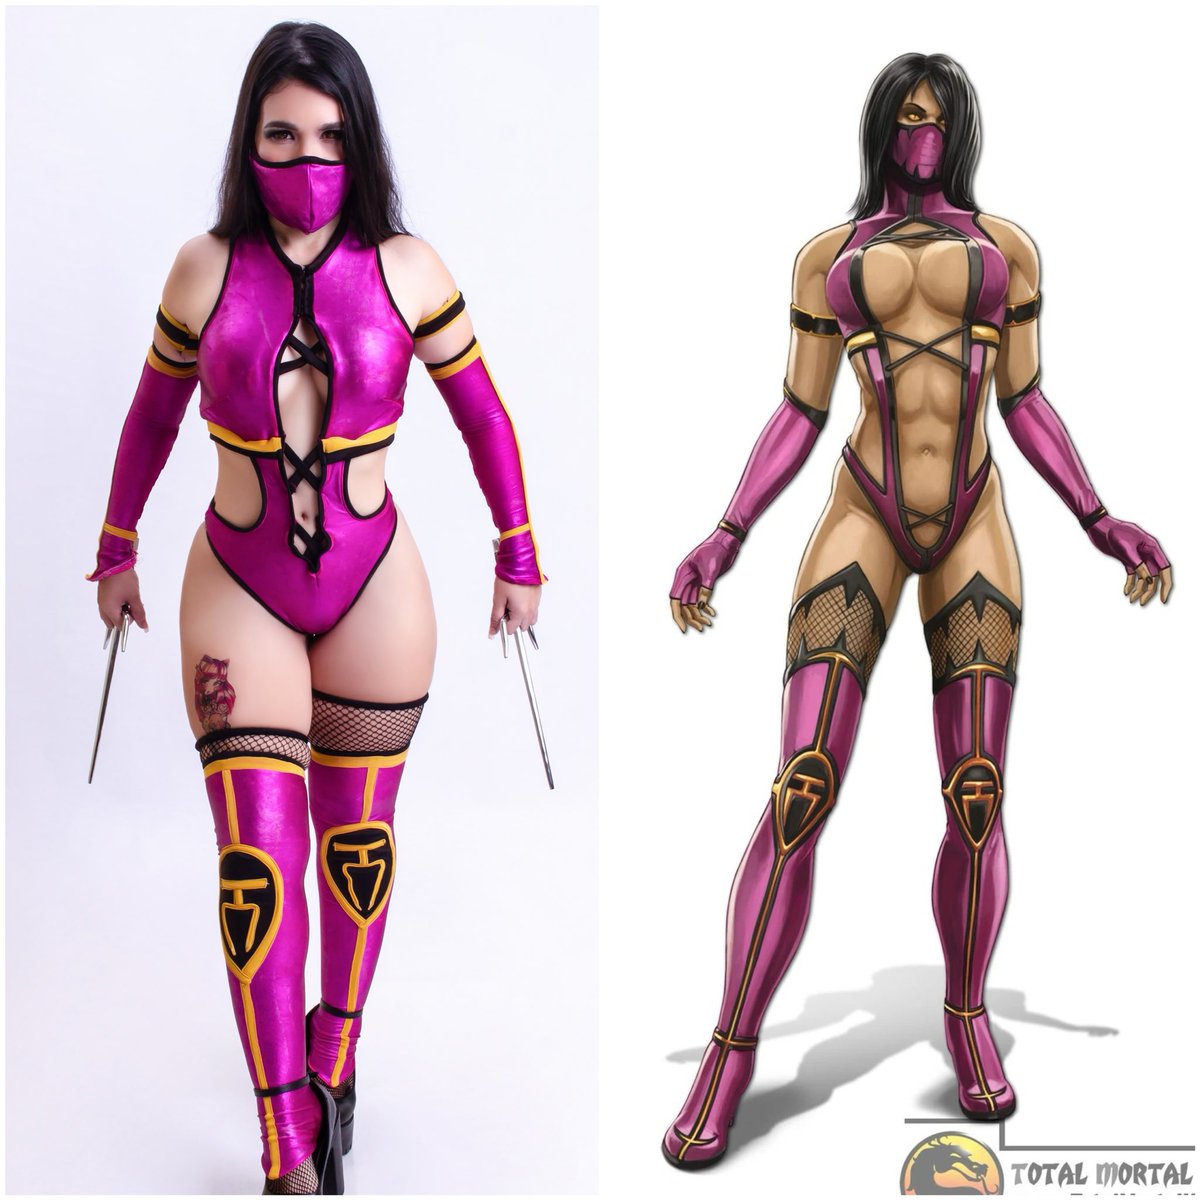 Which picture fits Better? Today is Character vs Cosplay 💕
•
Mileena from Mortal Kombat 
•
•
#mortalkombat #mileenacosplay #cosplay #mileenacosplay